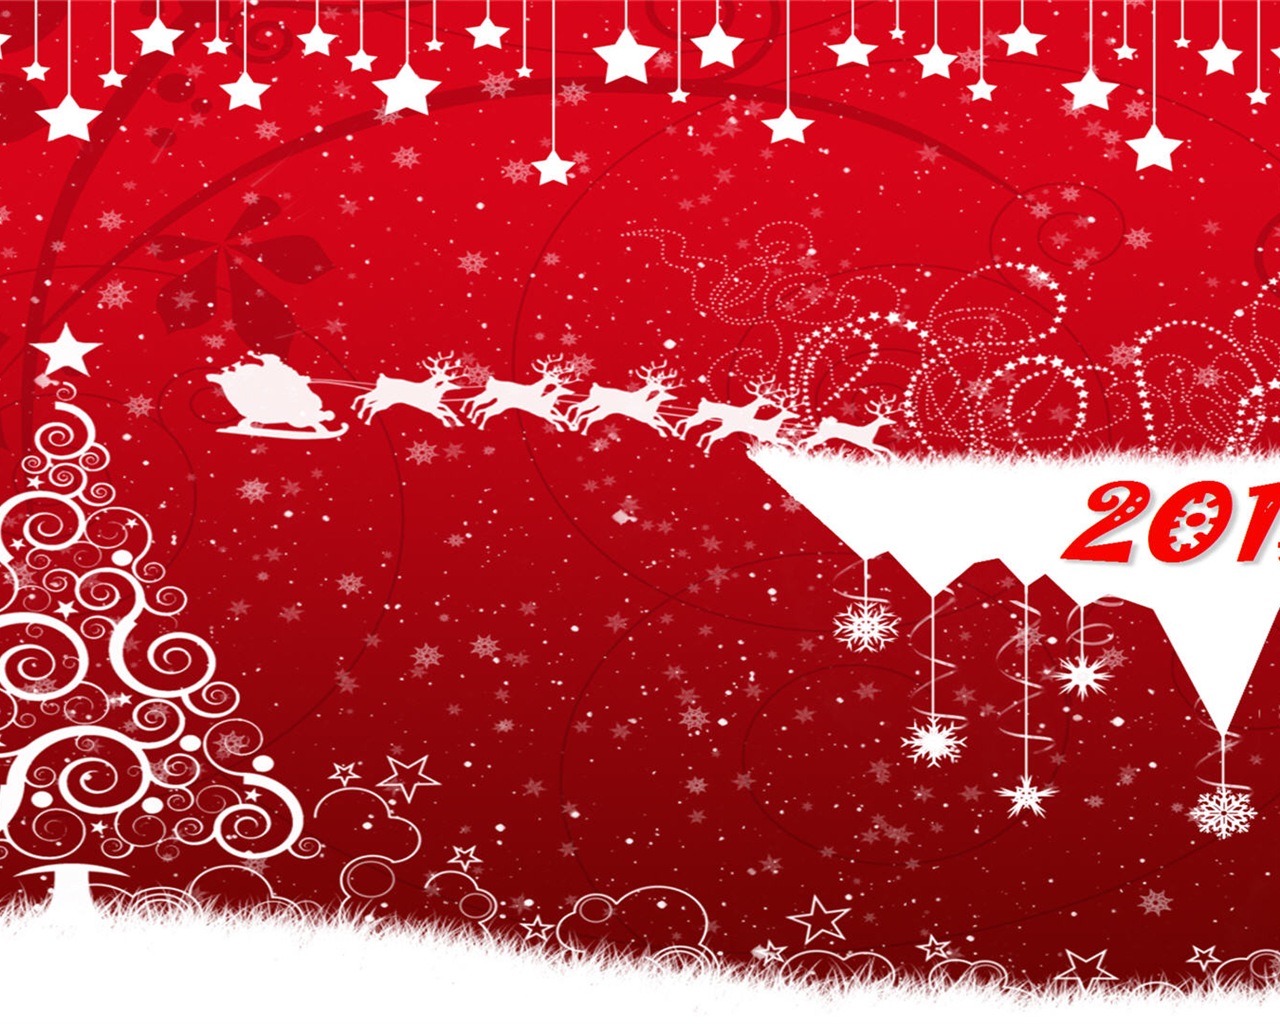 2013 Happy New Year HD wallpapers #13 - 1280x1024